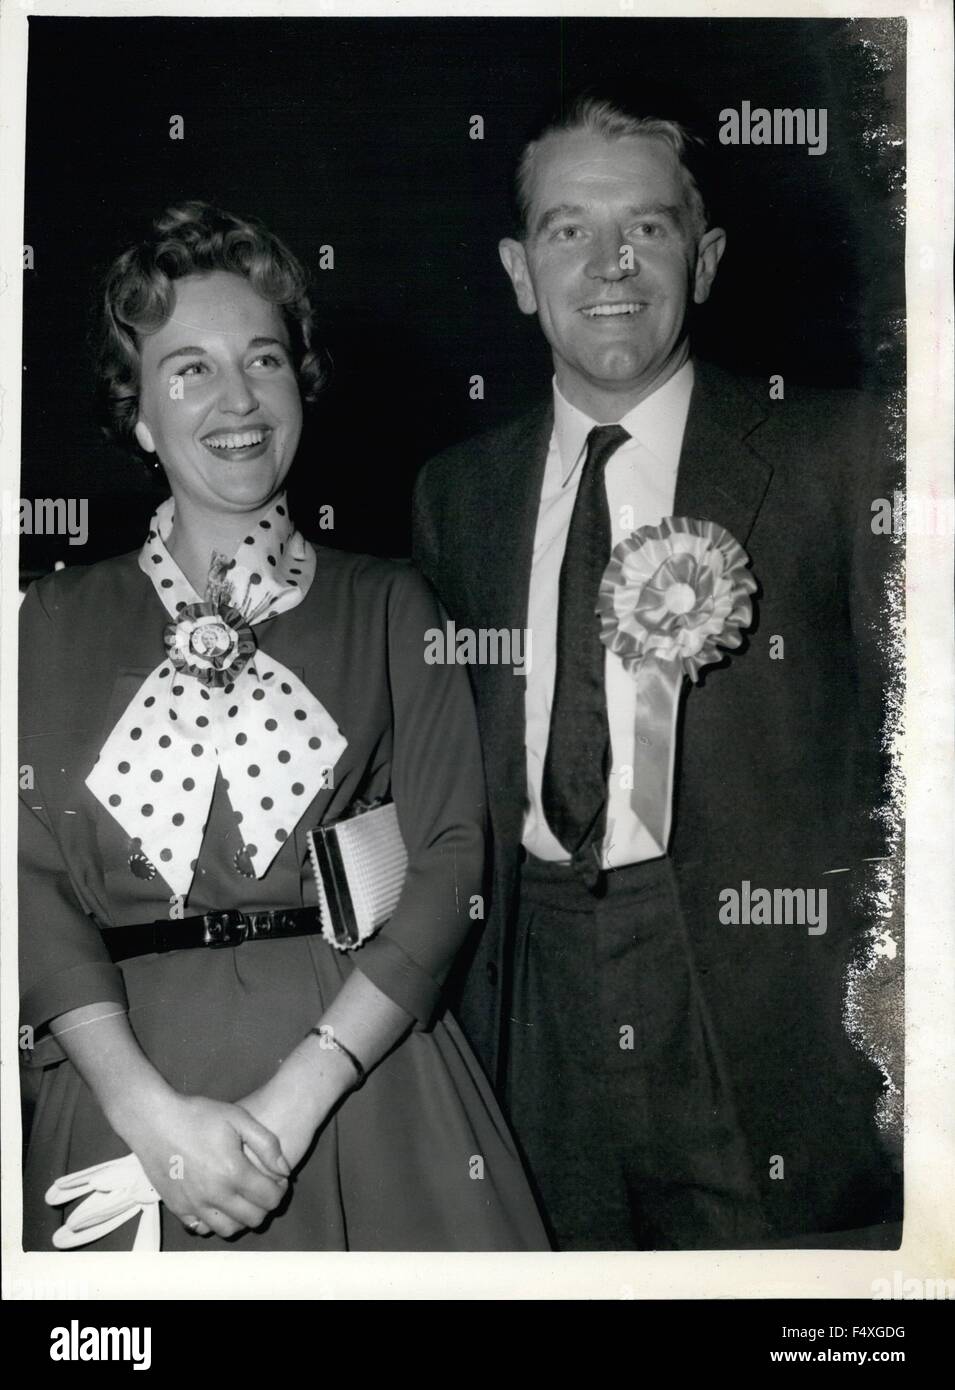 1968 - Conservatives win the General election Chris Chataway becomes an M.P.; Chris Chataway, the man who pioneered the four-minute-mile, also pioneered a Conservative victory in Lewisham North early today. Photo shows Chris Chatway pictured with his wife after he became Tory candidate for Lewisham North with a majority of 4,613 votes over his Labour opponent, Mr. Macdermot. © Keystone Pictures USA/ZUMAPRESS.com/Alamy Live News Stock Photo